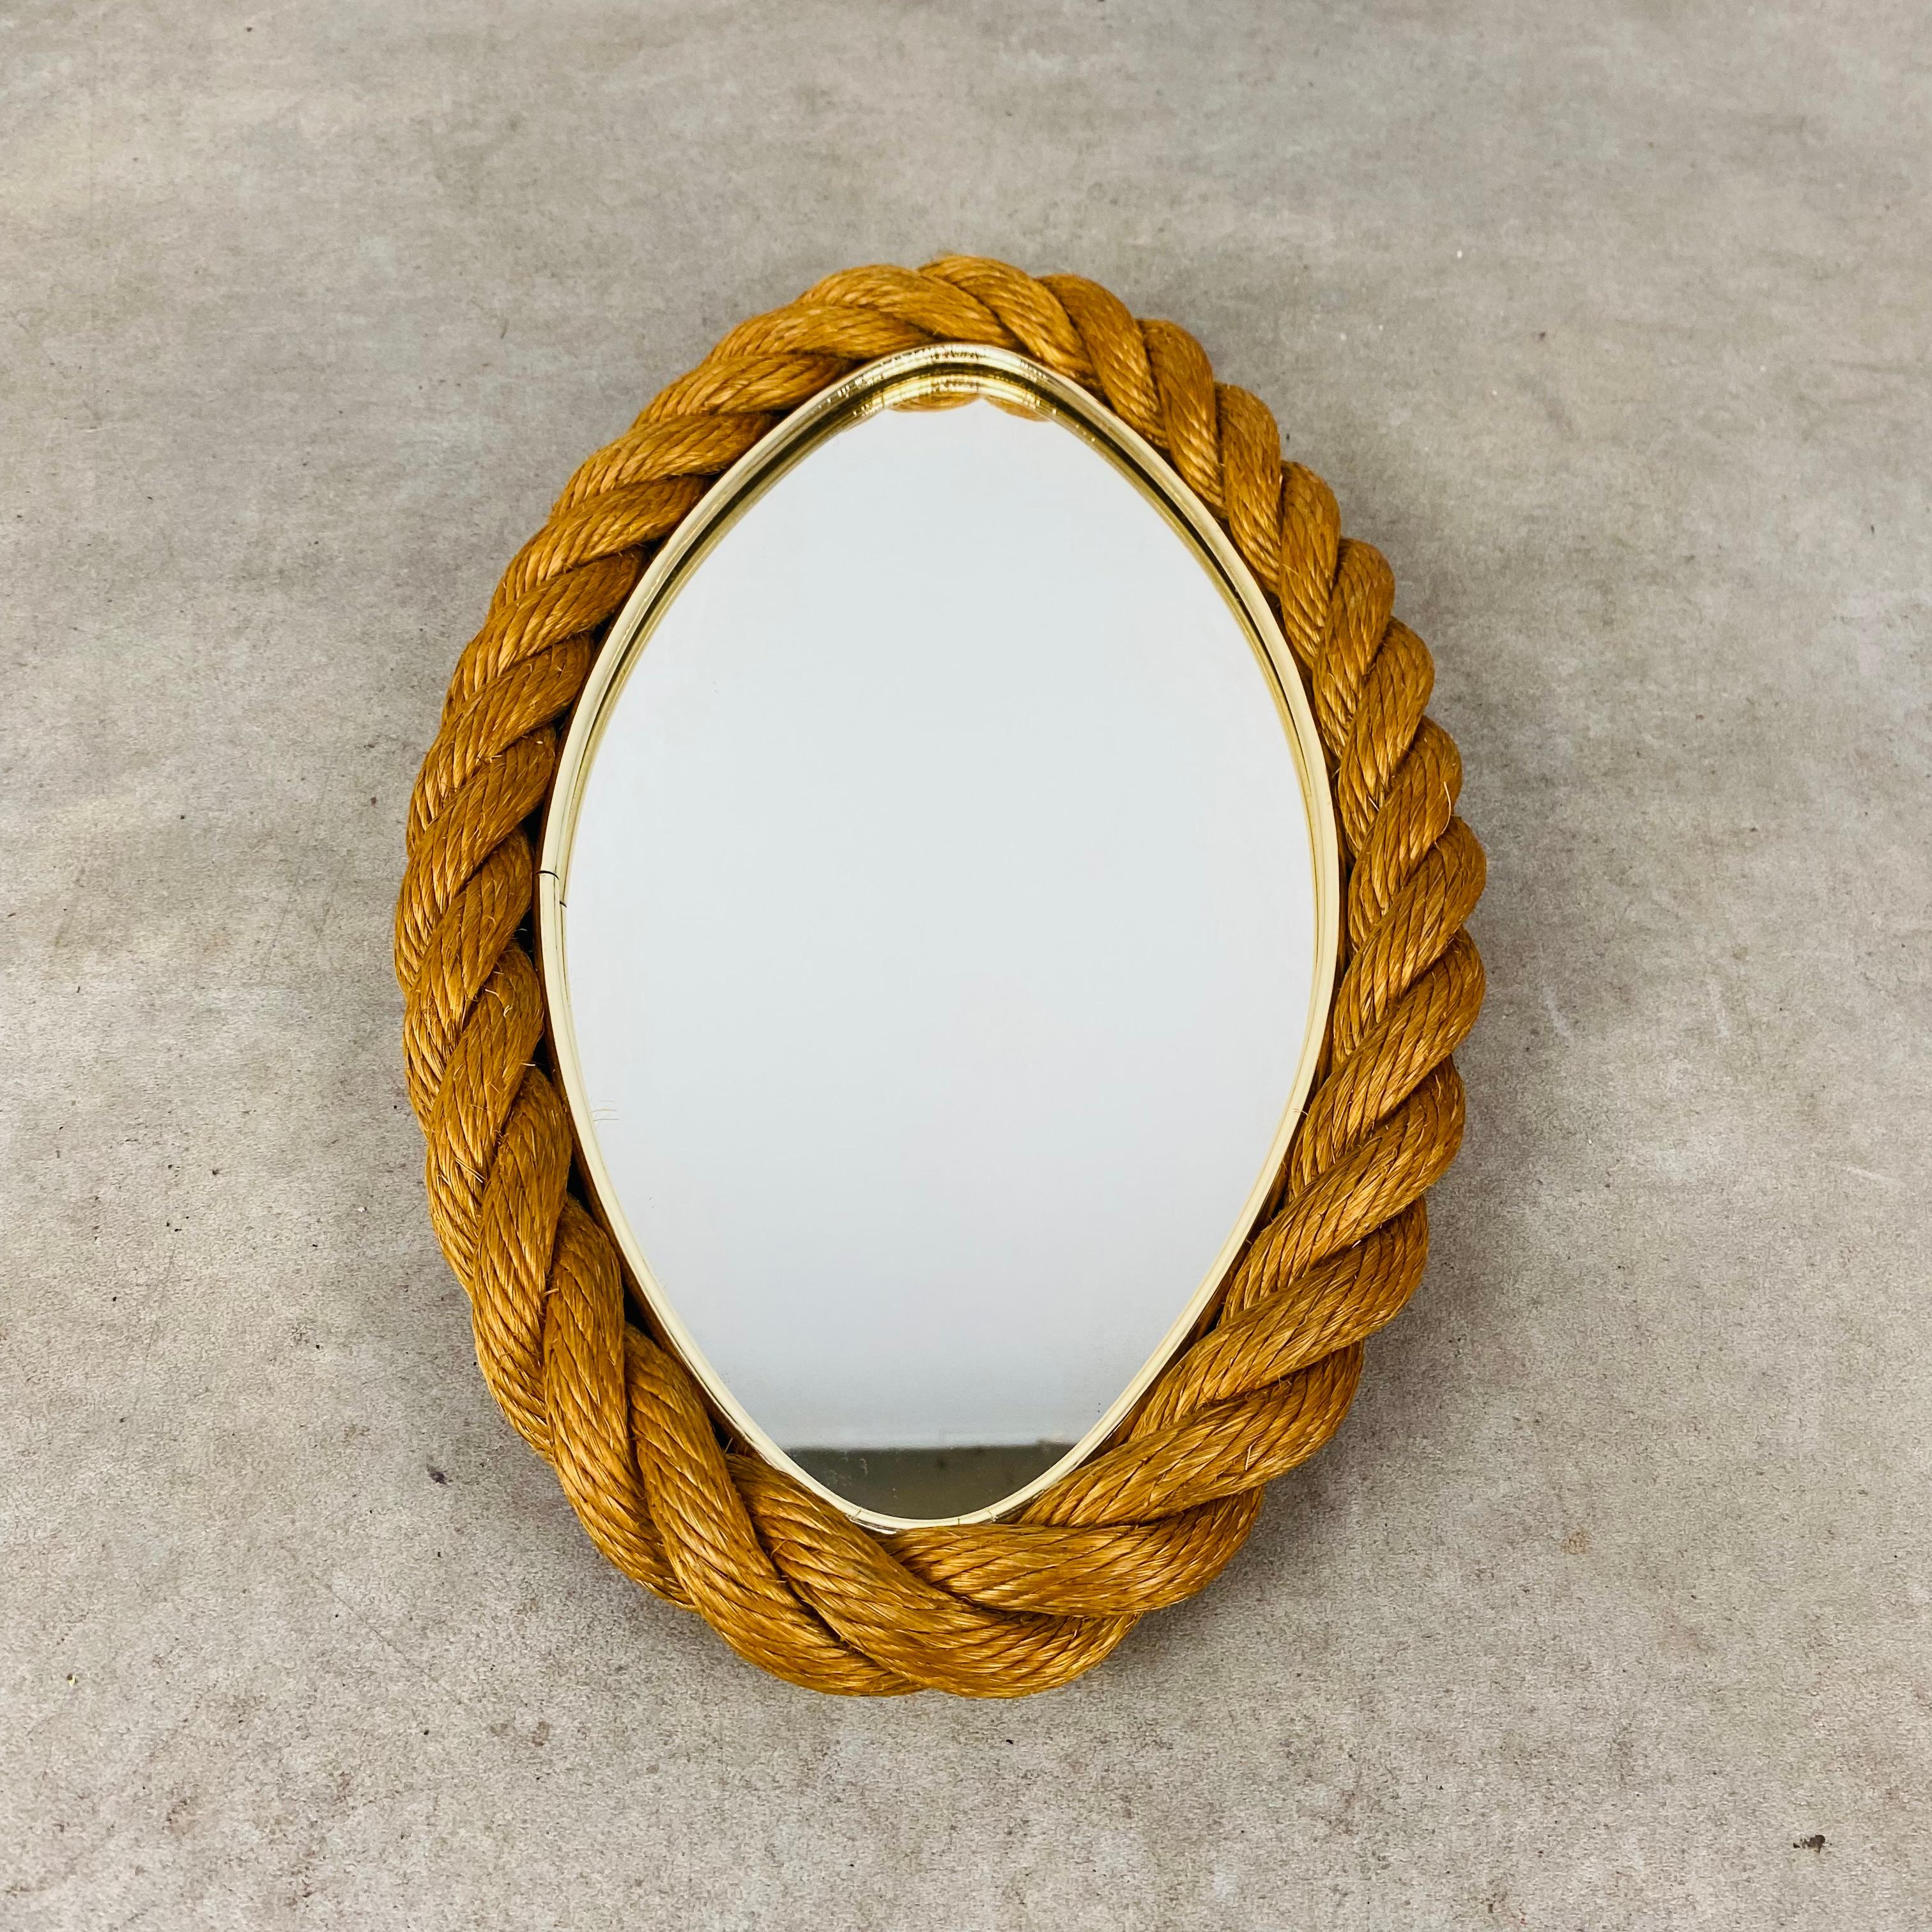 Oval rope mirror in the style of Adrien Audoux and Frida Minet. 